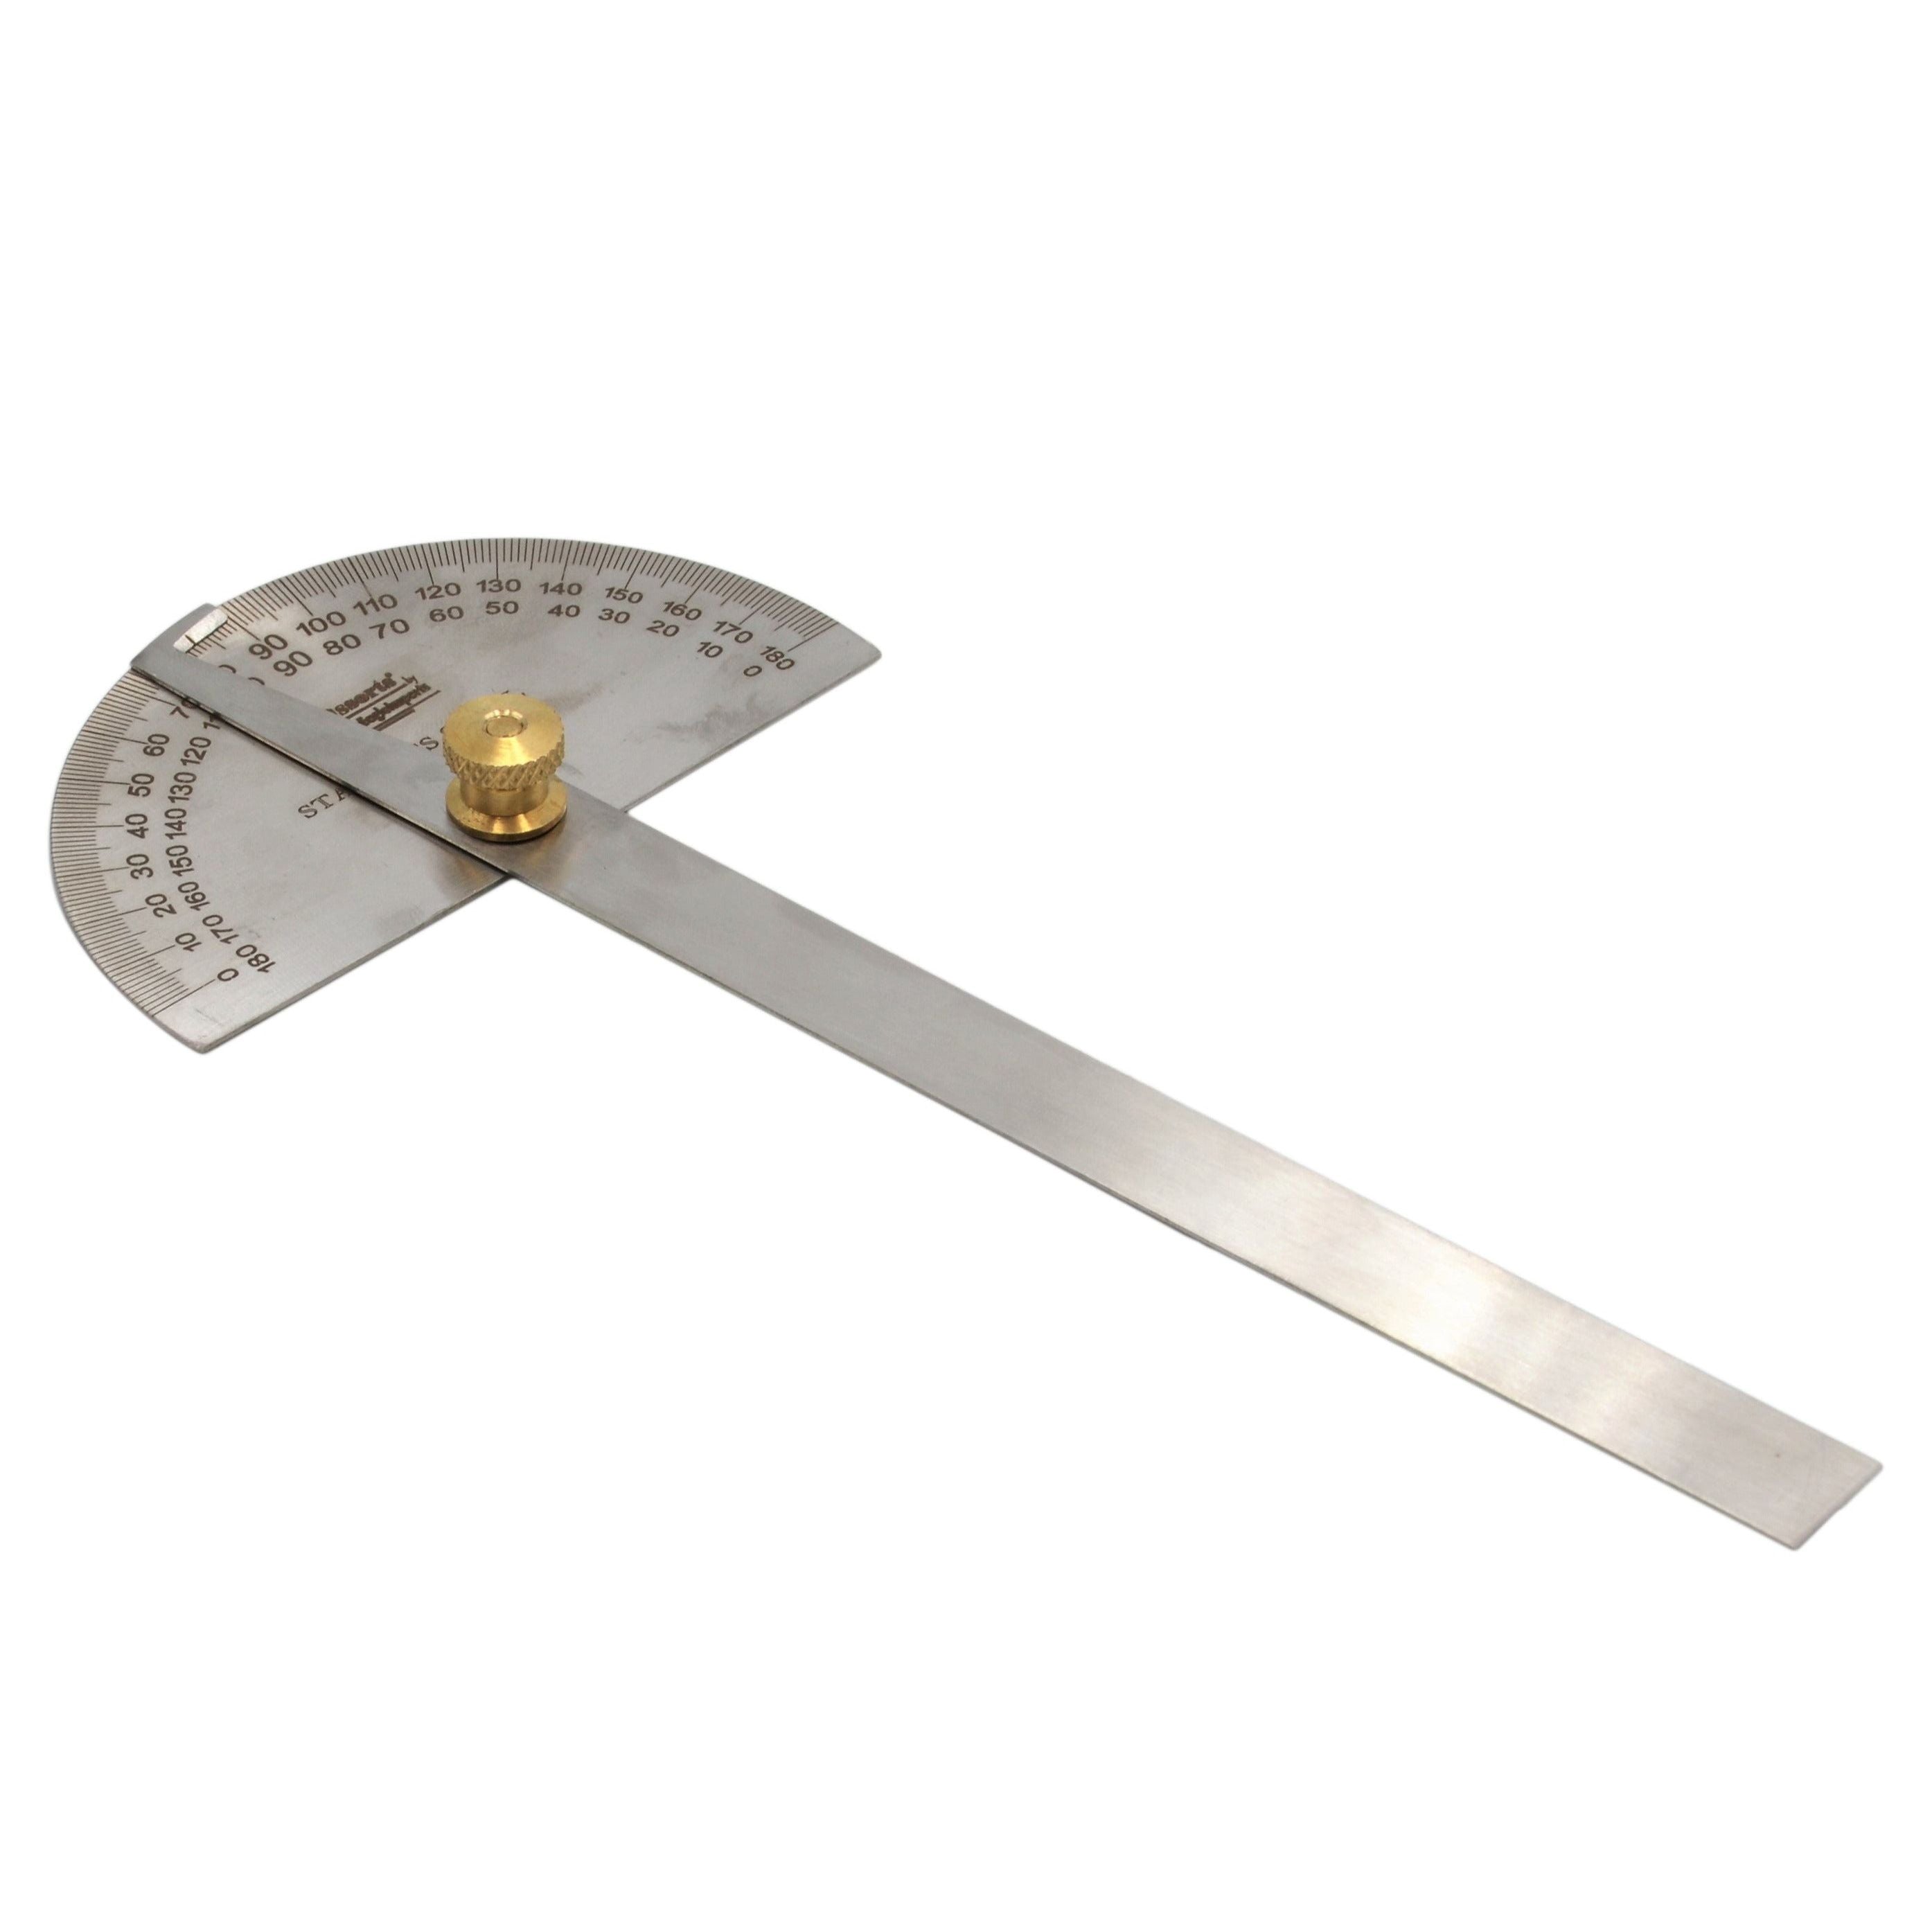 Stainless Steel 0-180 Degree Protractor Ruler Angle Gauge